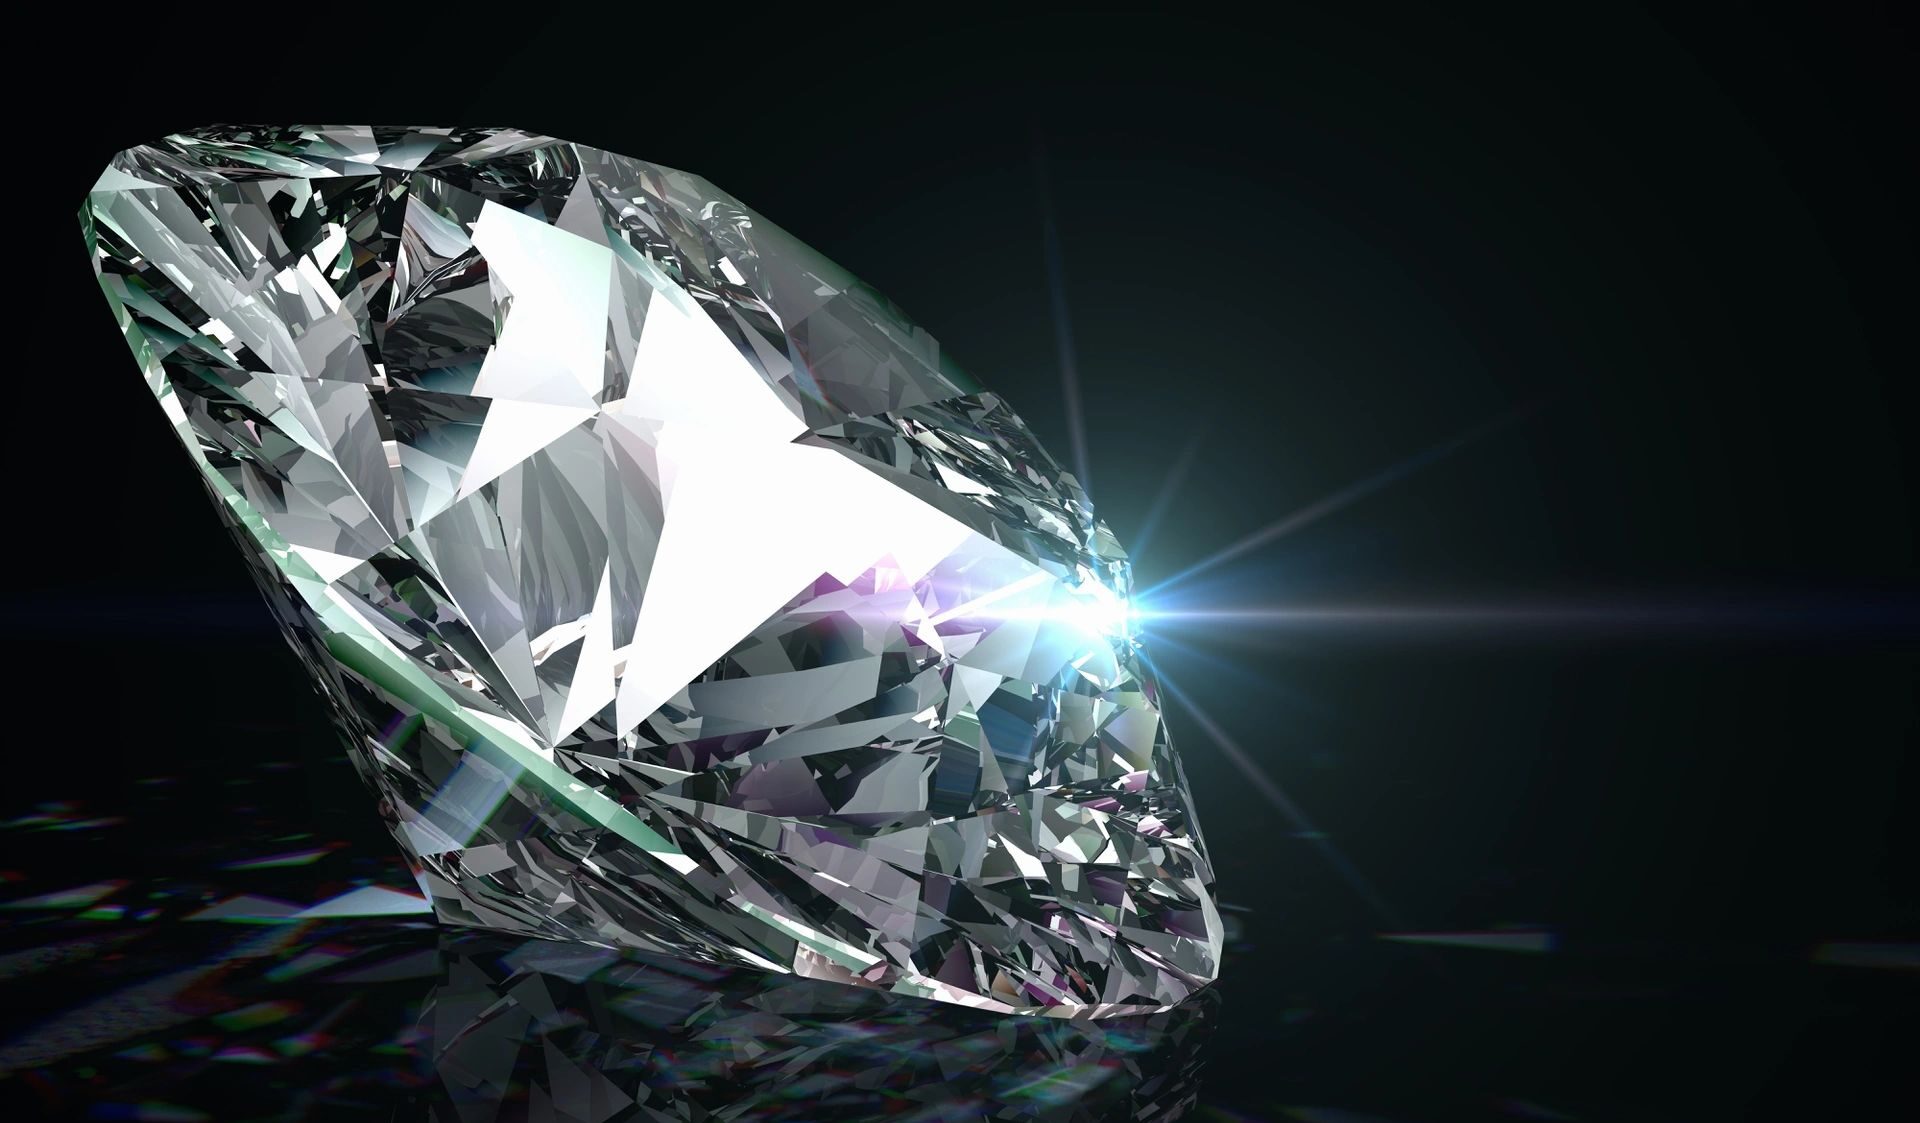 diamonds can conduct electricity